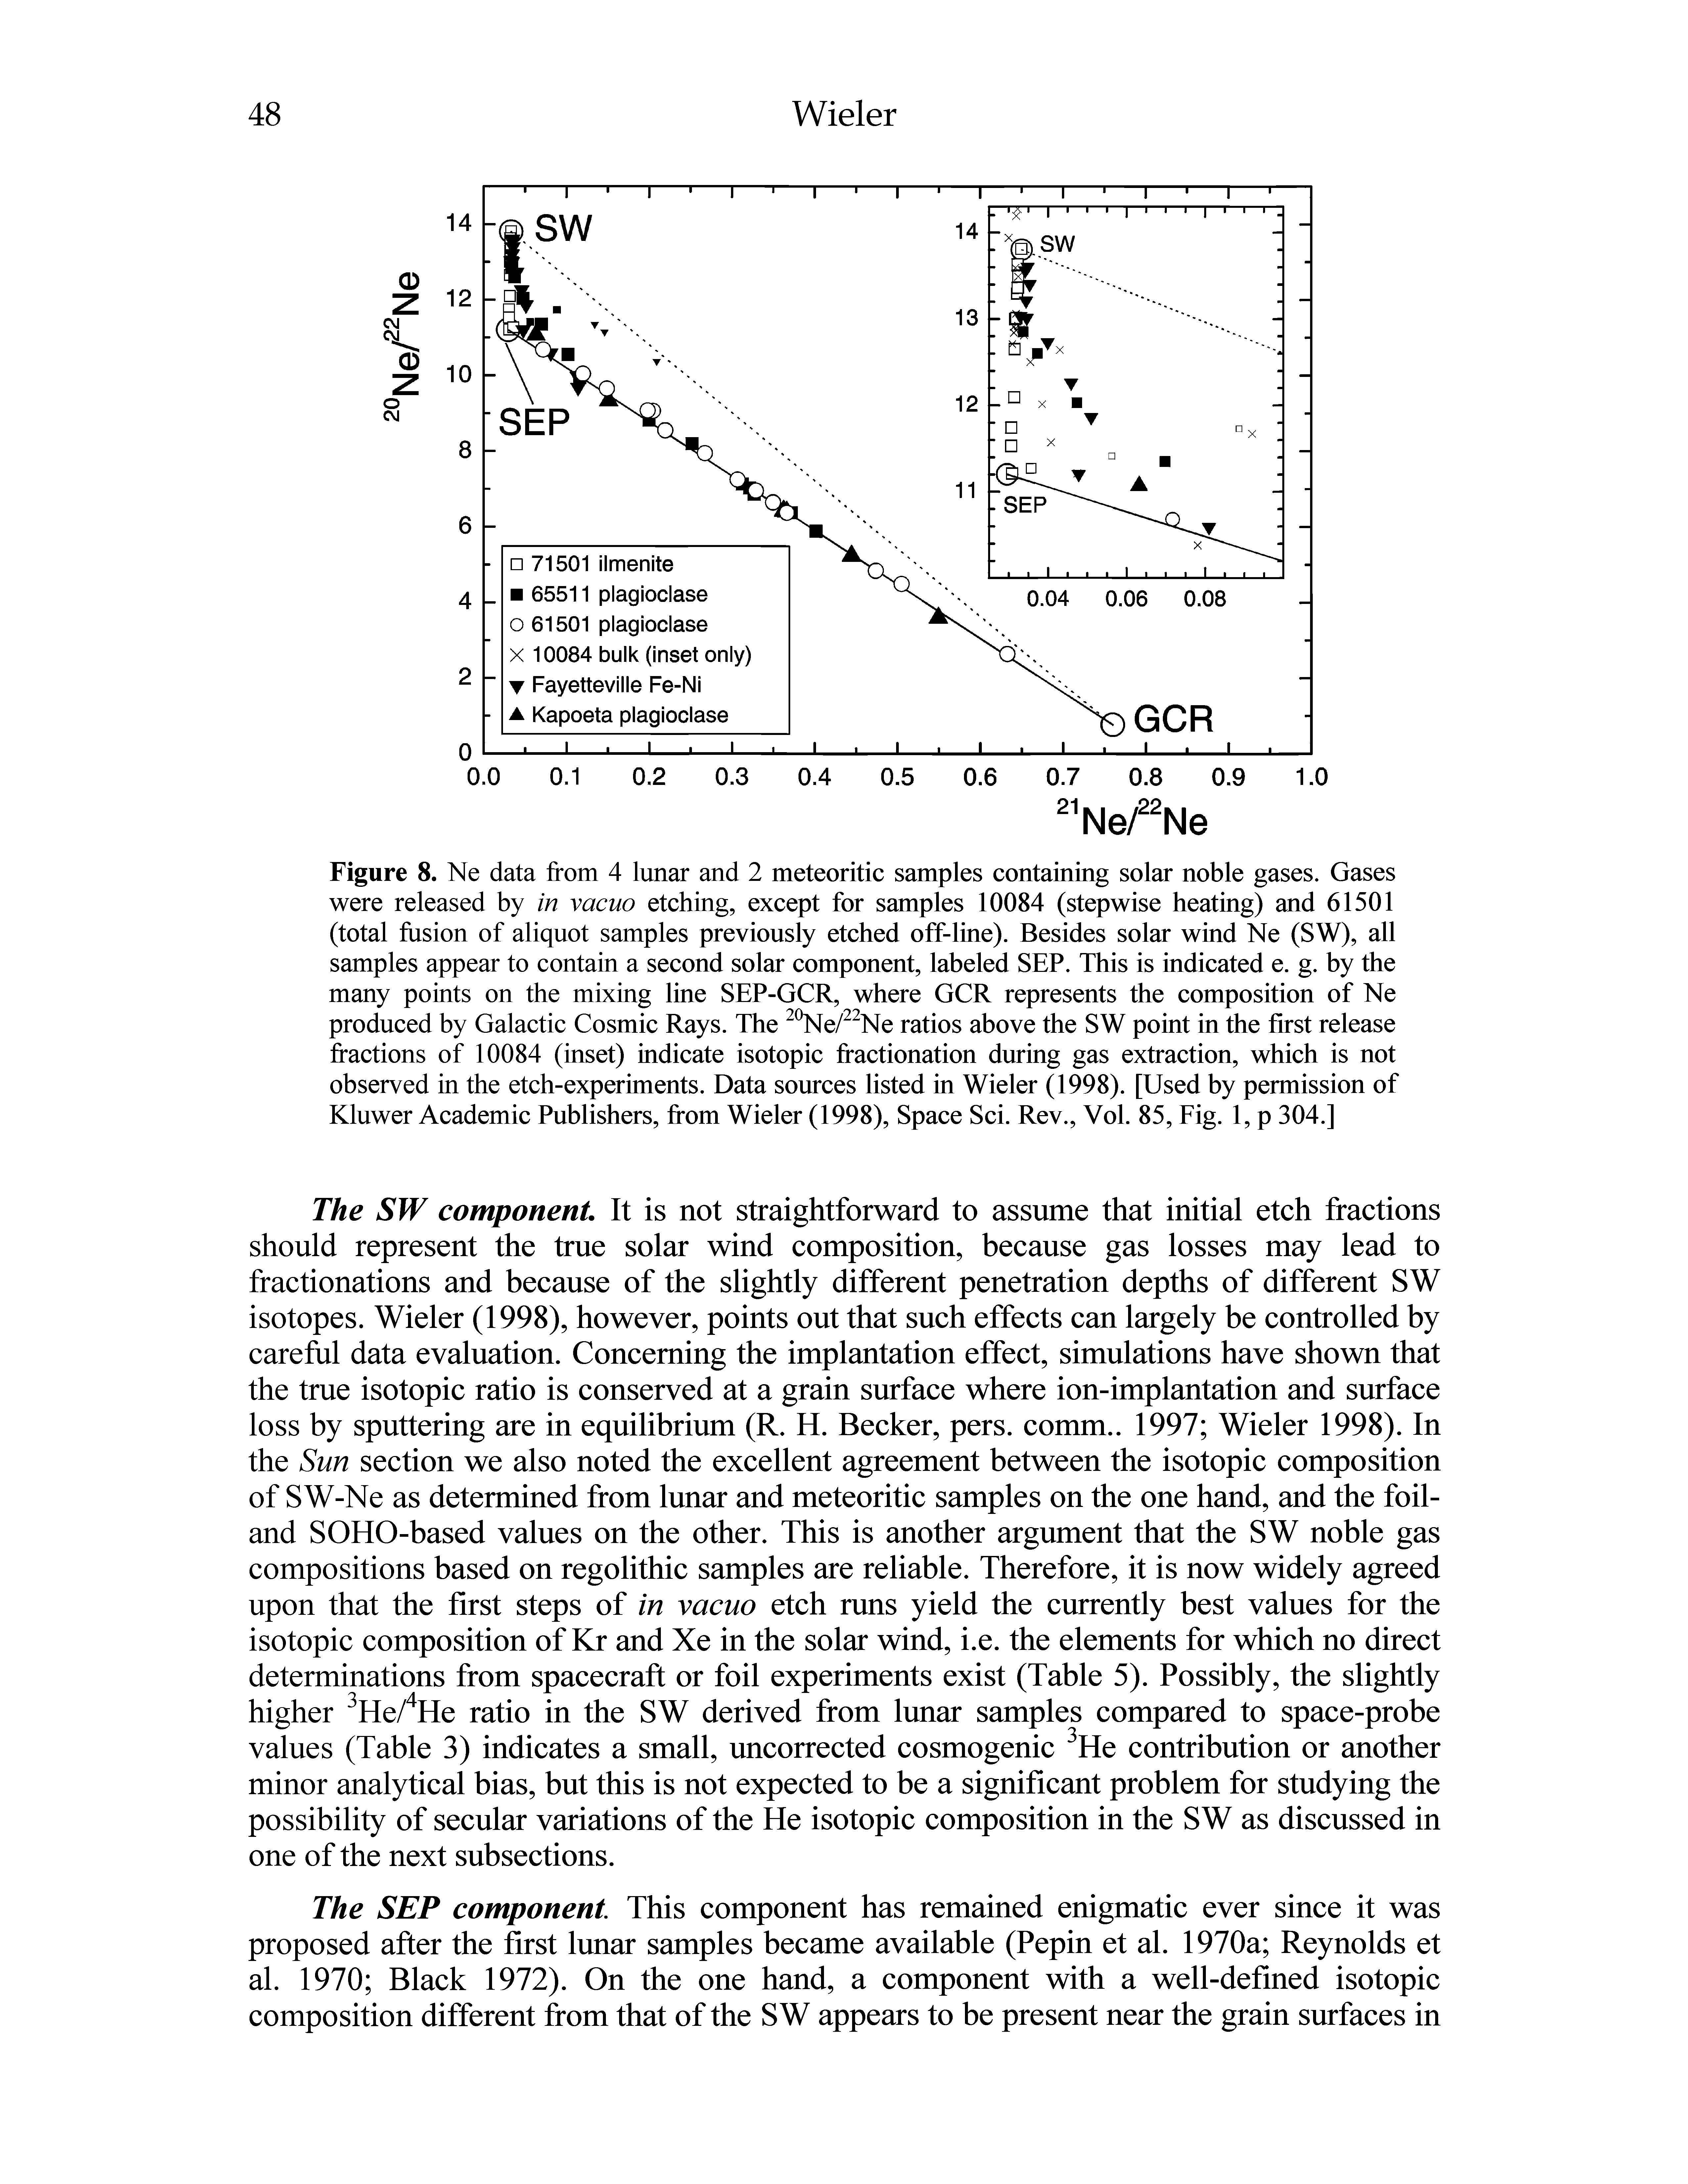 Figure 8. Ne data from 4 lunar and 2 meteoritic samples containing solar noble gases. Gases were released by in vacuo etching, except for samples 10084 (stepwise heating) and 61501 (total fusion of aliquot samples previously etched off-line). Besides solar wind Ne (SW), all samples appear to contain a second solar component, labeled SEP. This is indicated e. g. by the many points on the mixing line SEP-GCR, where GCR represents the composition of Ne produced by Galactic Cosmic Rays. The Ne/ Ne ratios above the SW point in the first release fractions of 10084 (inset) indicate isotopic fractionation during gas extraction, which is not observed in the etch-experiments. Data sources listed in Wieler (1998). [Used by permission of Kluwer Academic Publishers, from Wieler (1998), Space Sci. Rev., Vol. 85, Fig. 1, p 304.]...